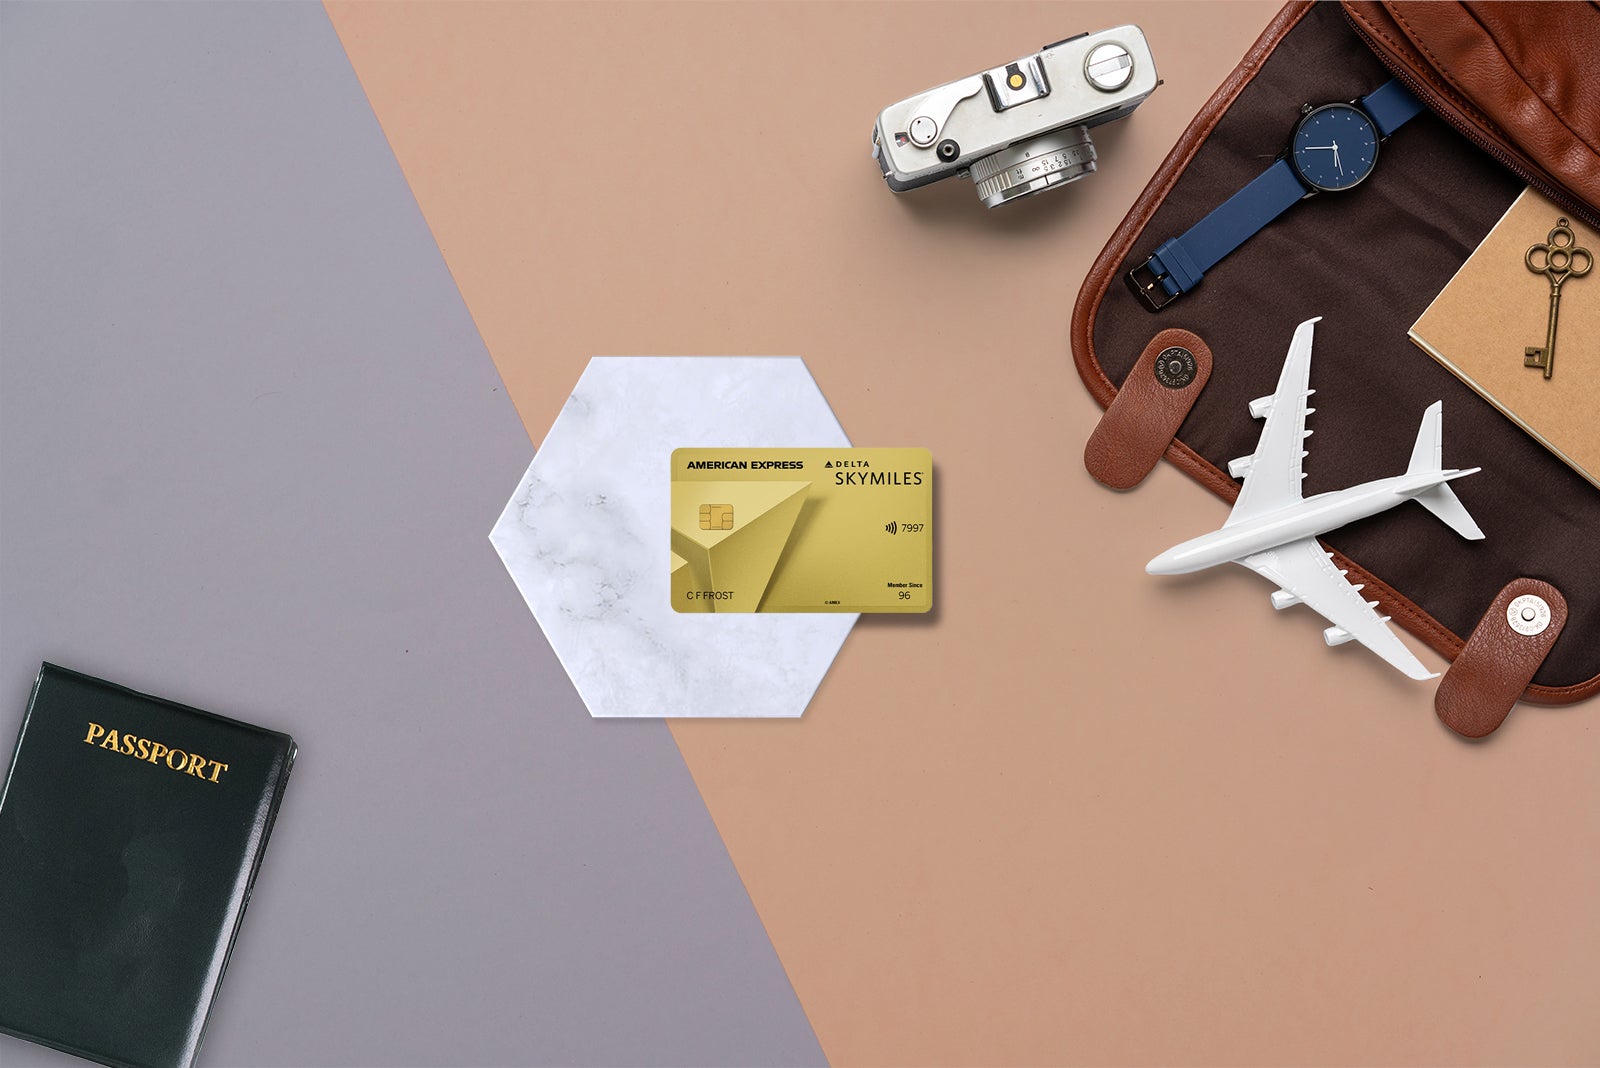 You are currently viewing New Delta credit card offers: Earn up to 100,000 bonus miles